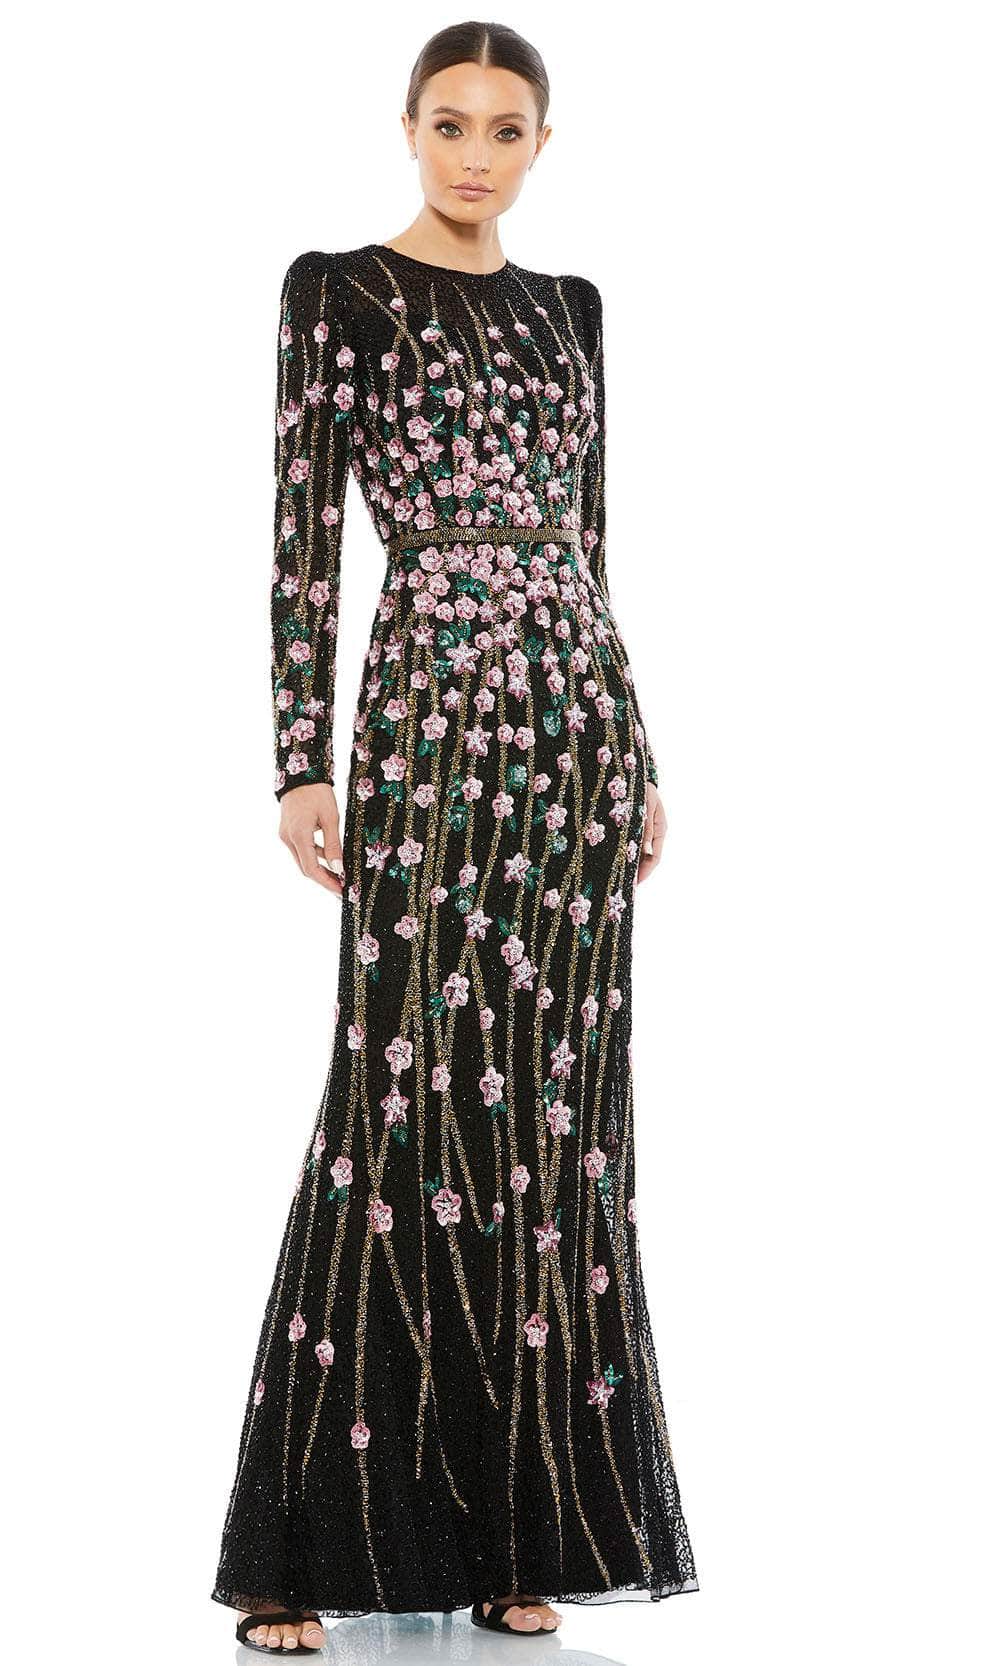 Mac Duggal 5492 - Sequin and Beads Long Sleeve Prom Dress
